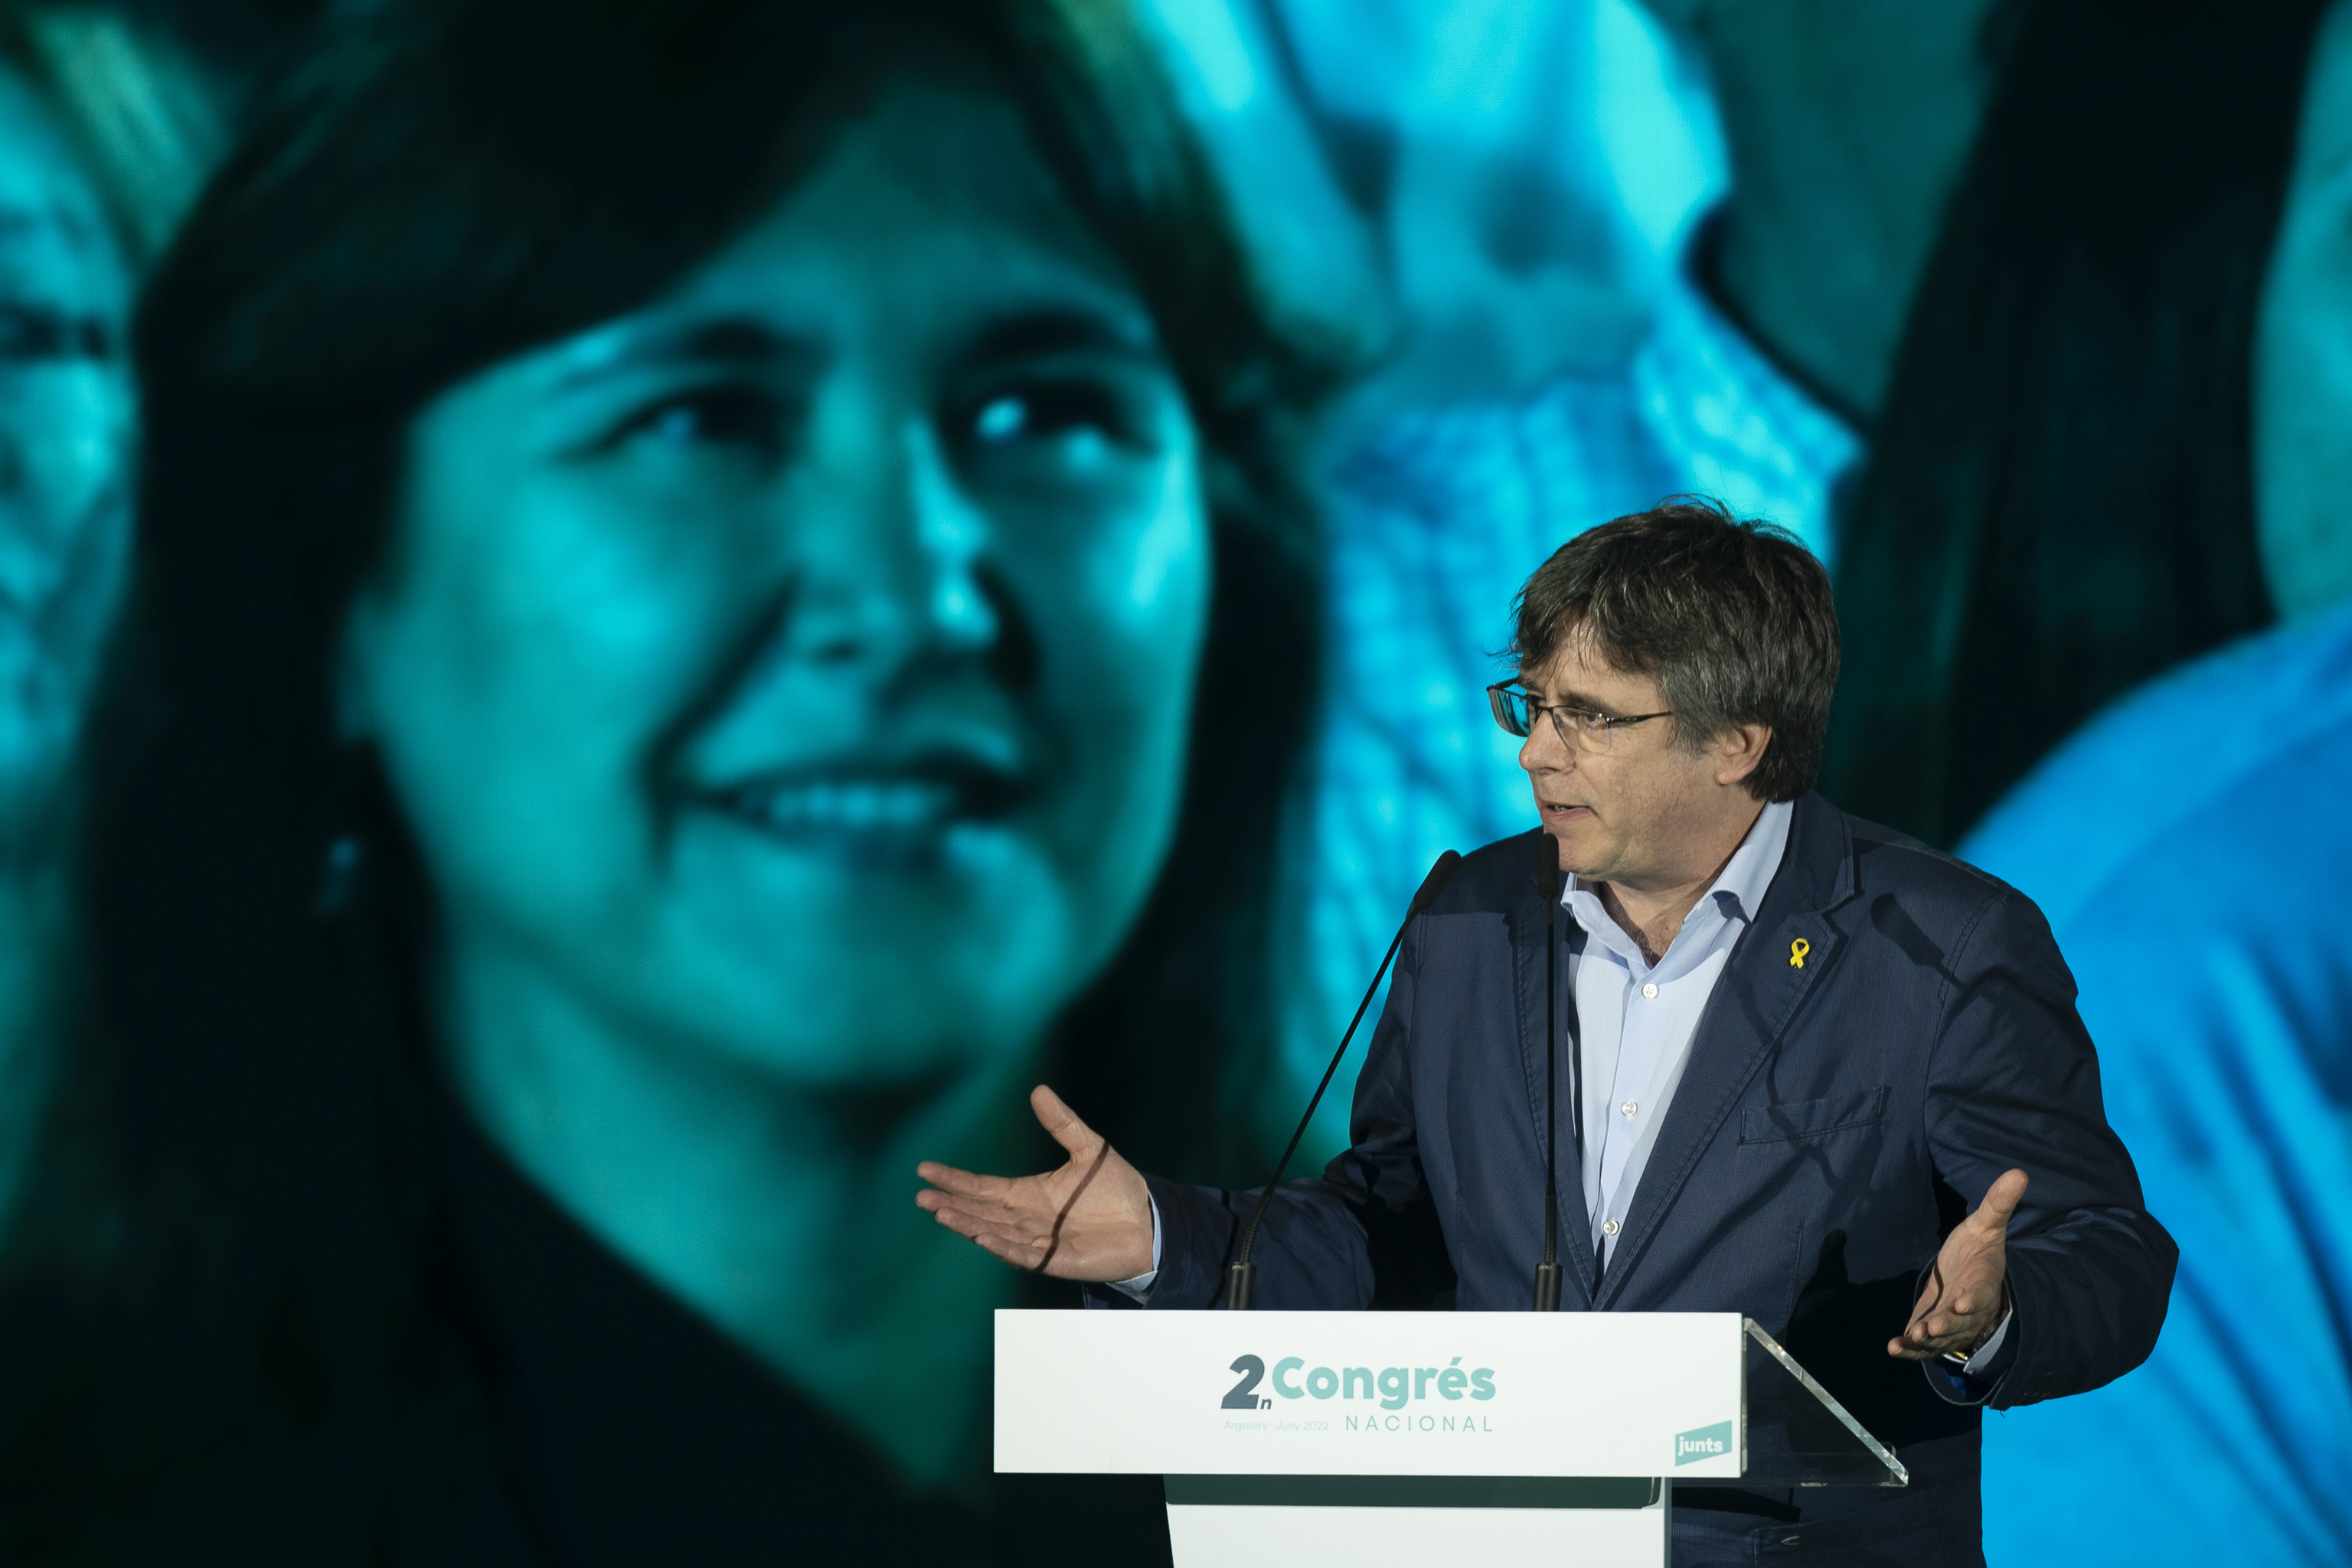 Puigdemont Durante is interference